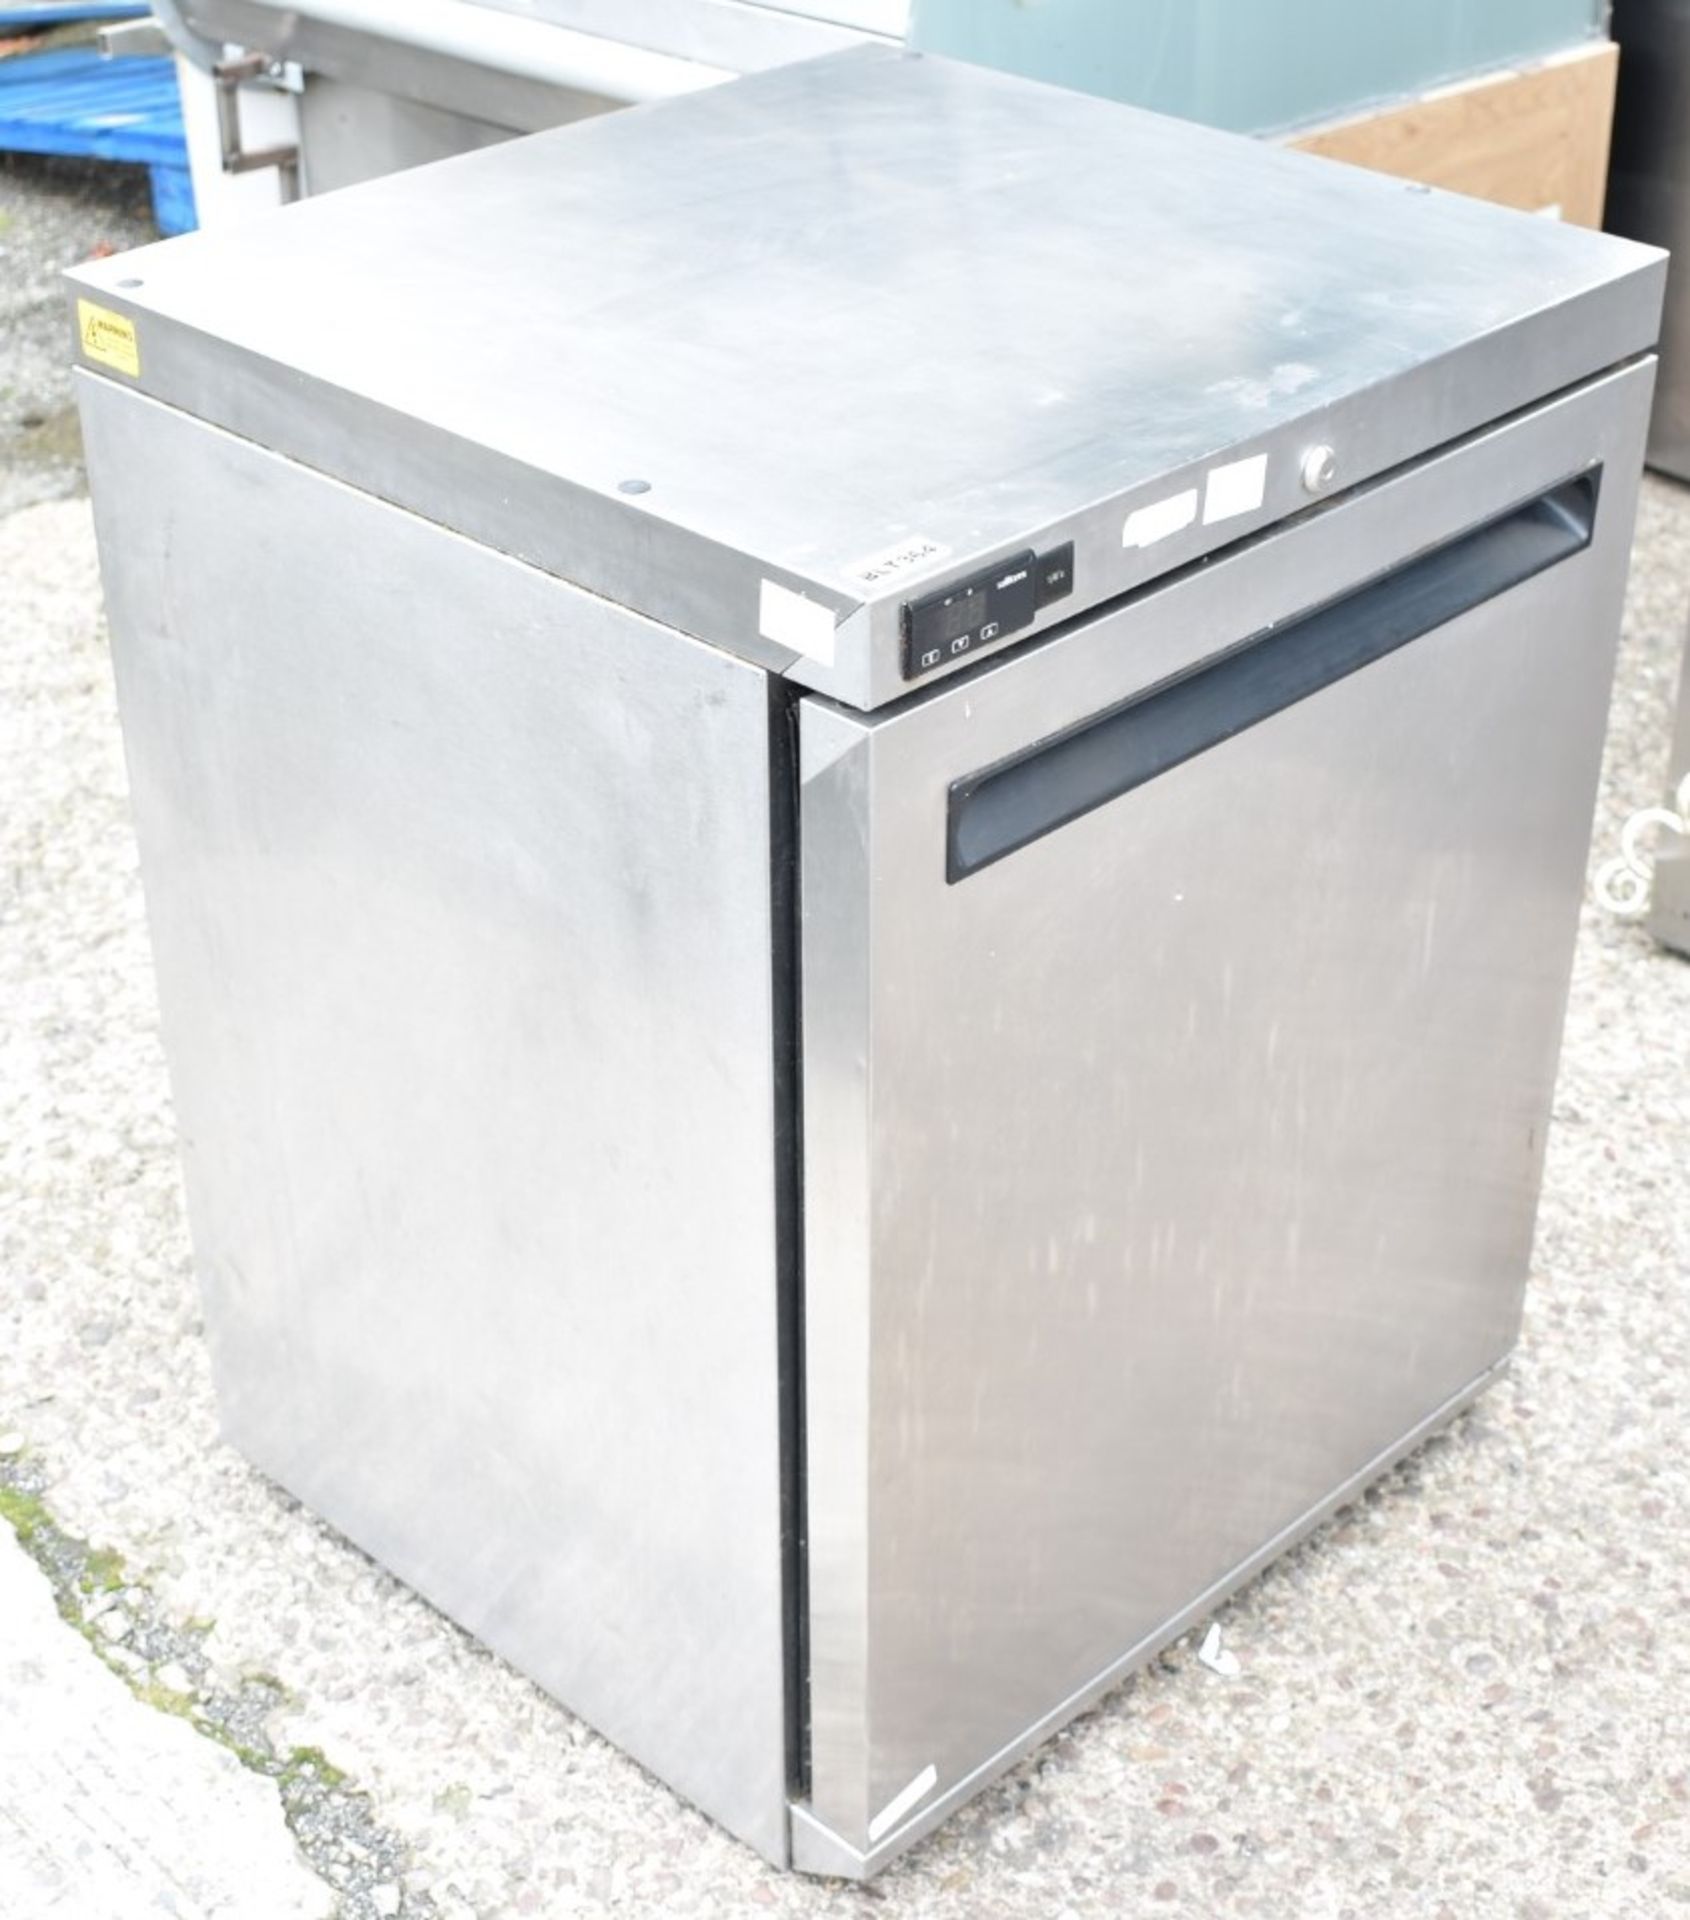 1 x Williams Single Door Under Counter Fridge - H82.5 x W65 x D65 cms - Stainless Steel Exterior - - Image 2 of 5